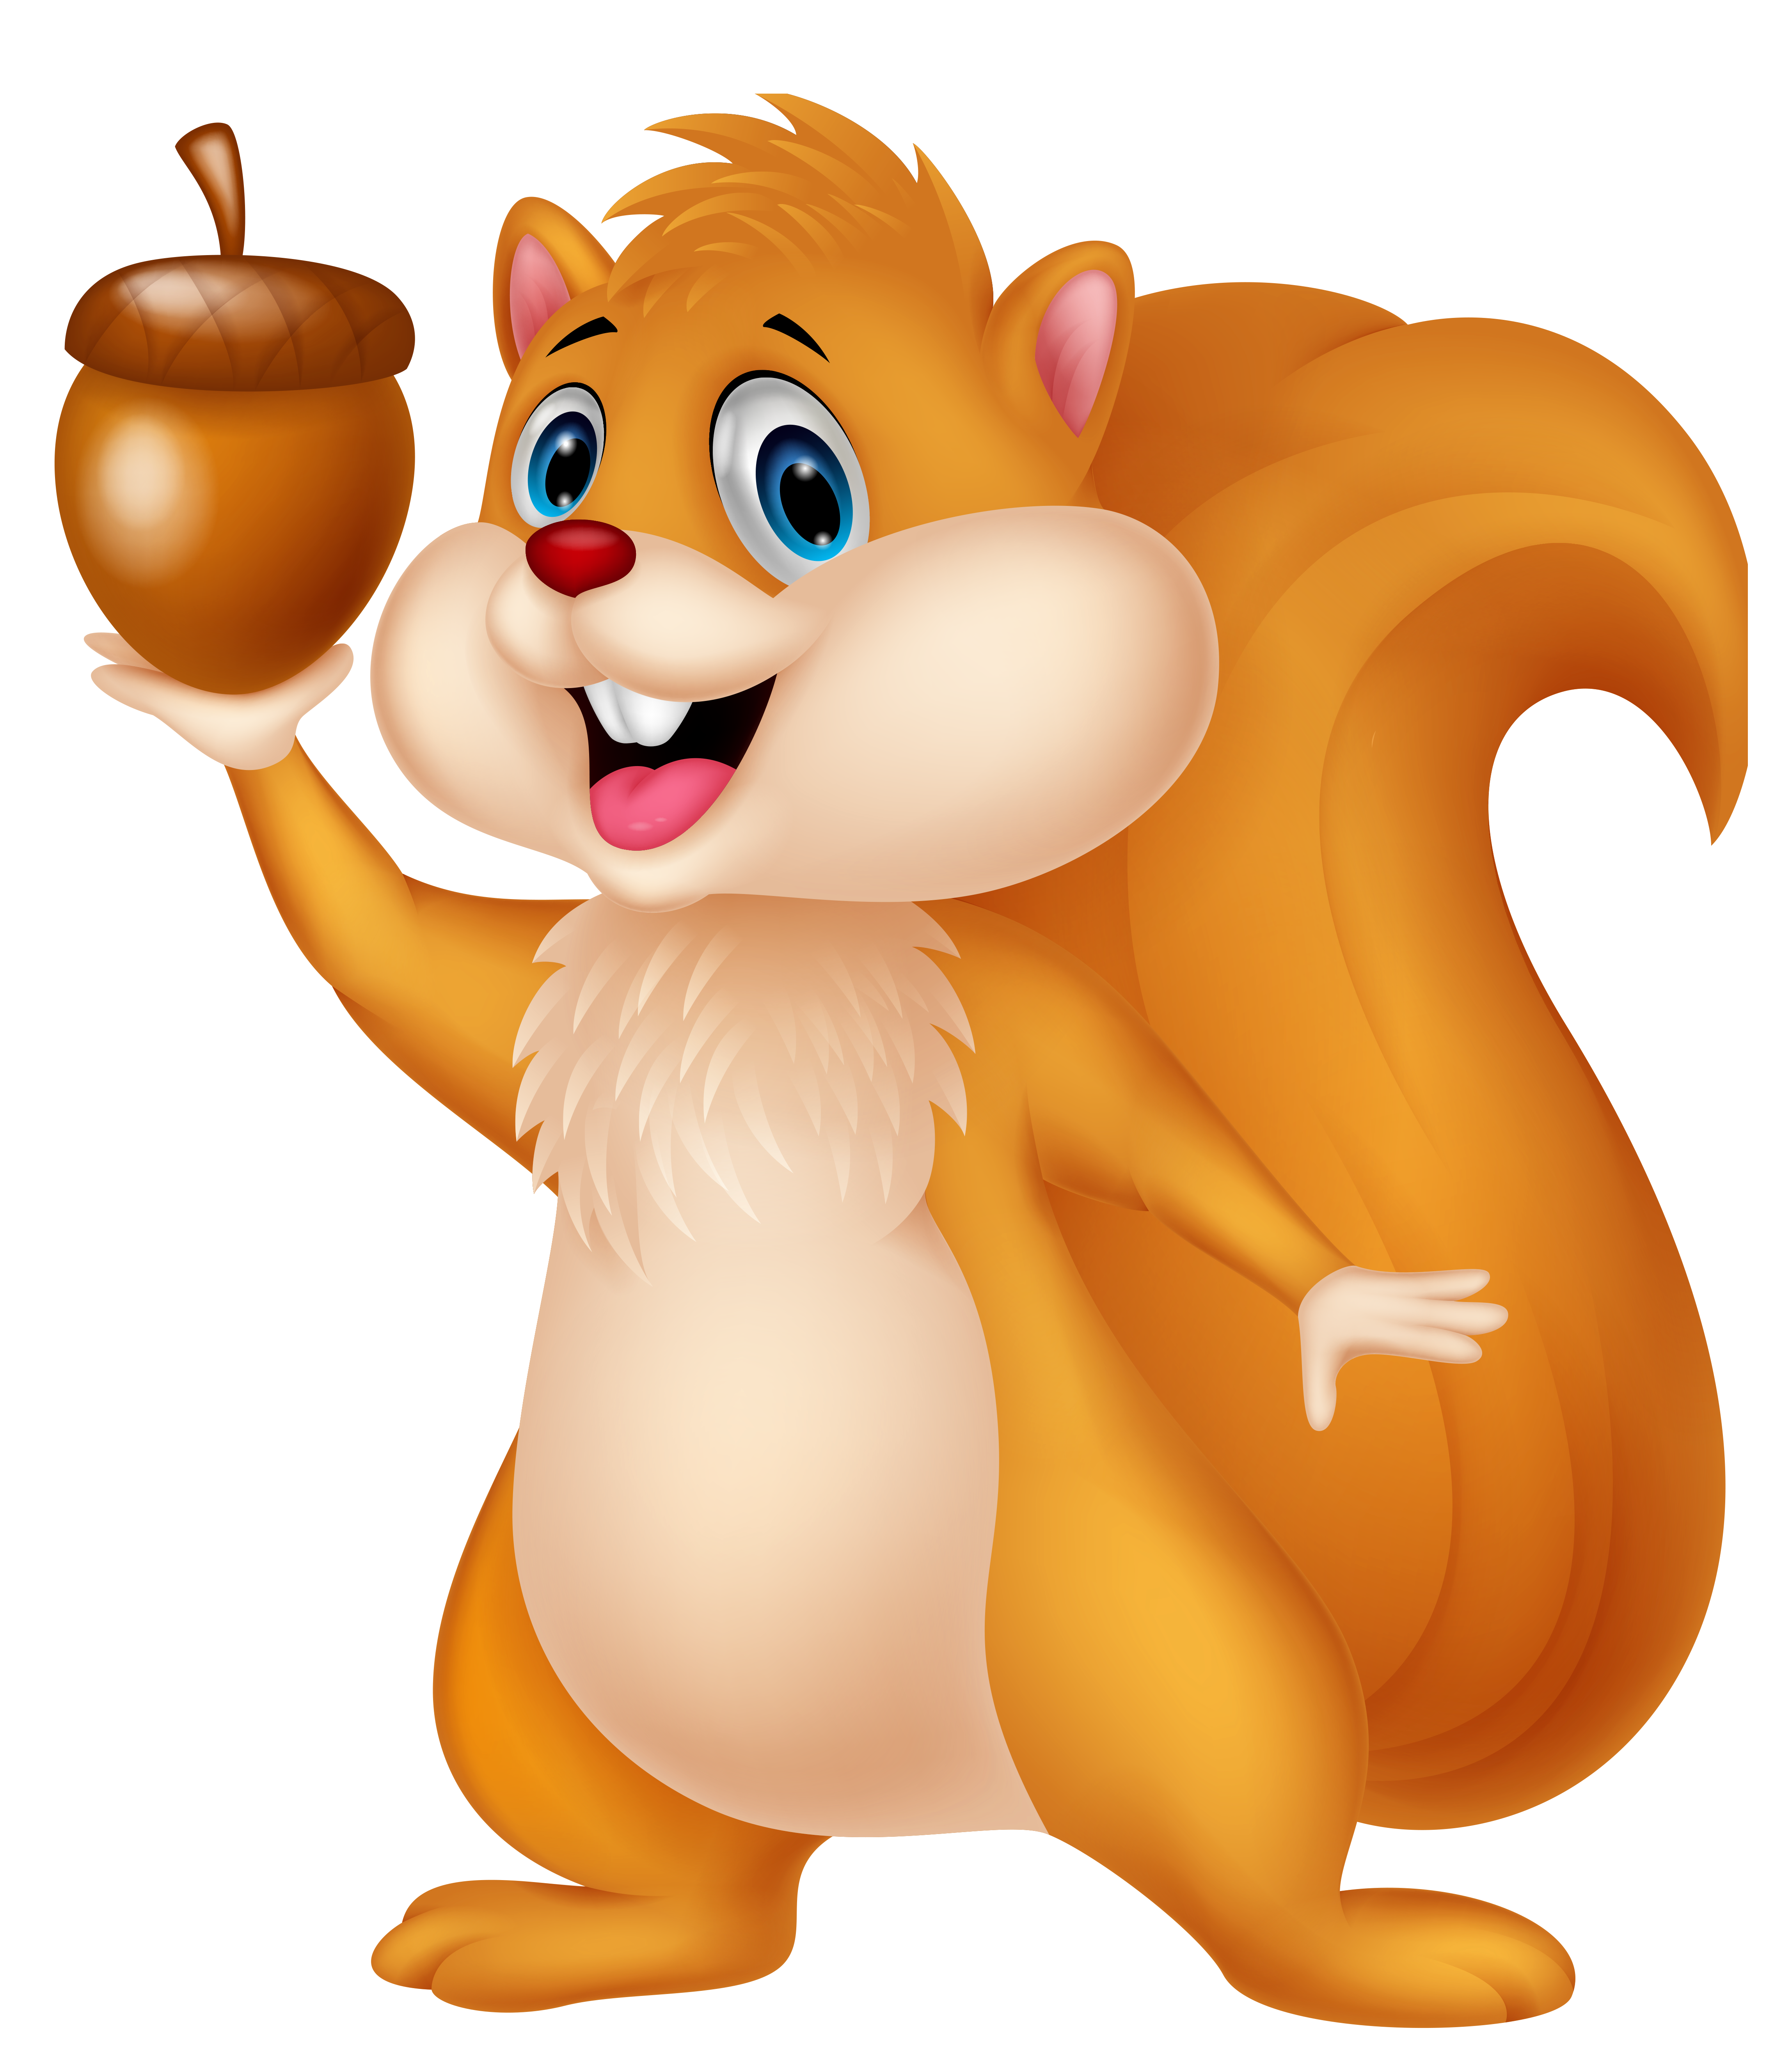 Cute squirrel holding nuts, S